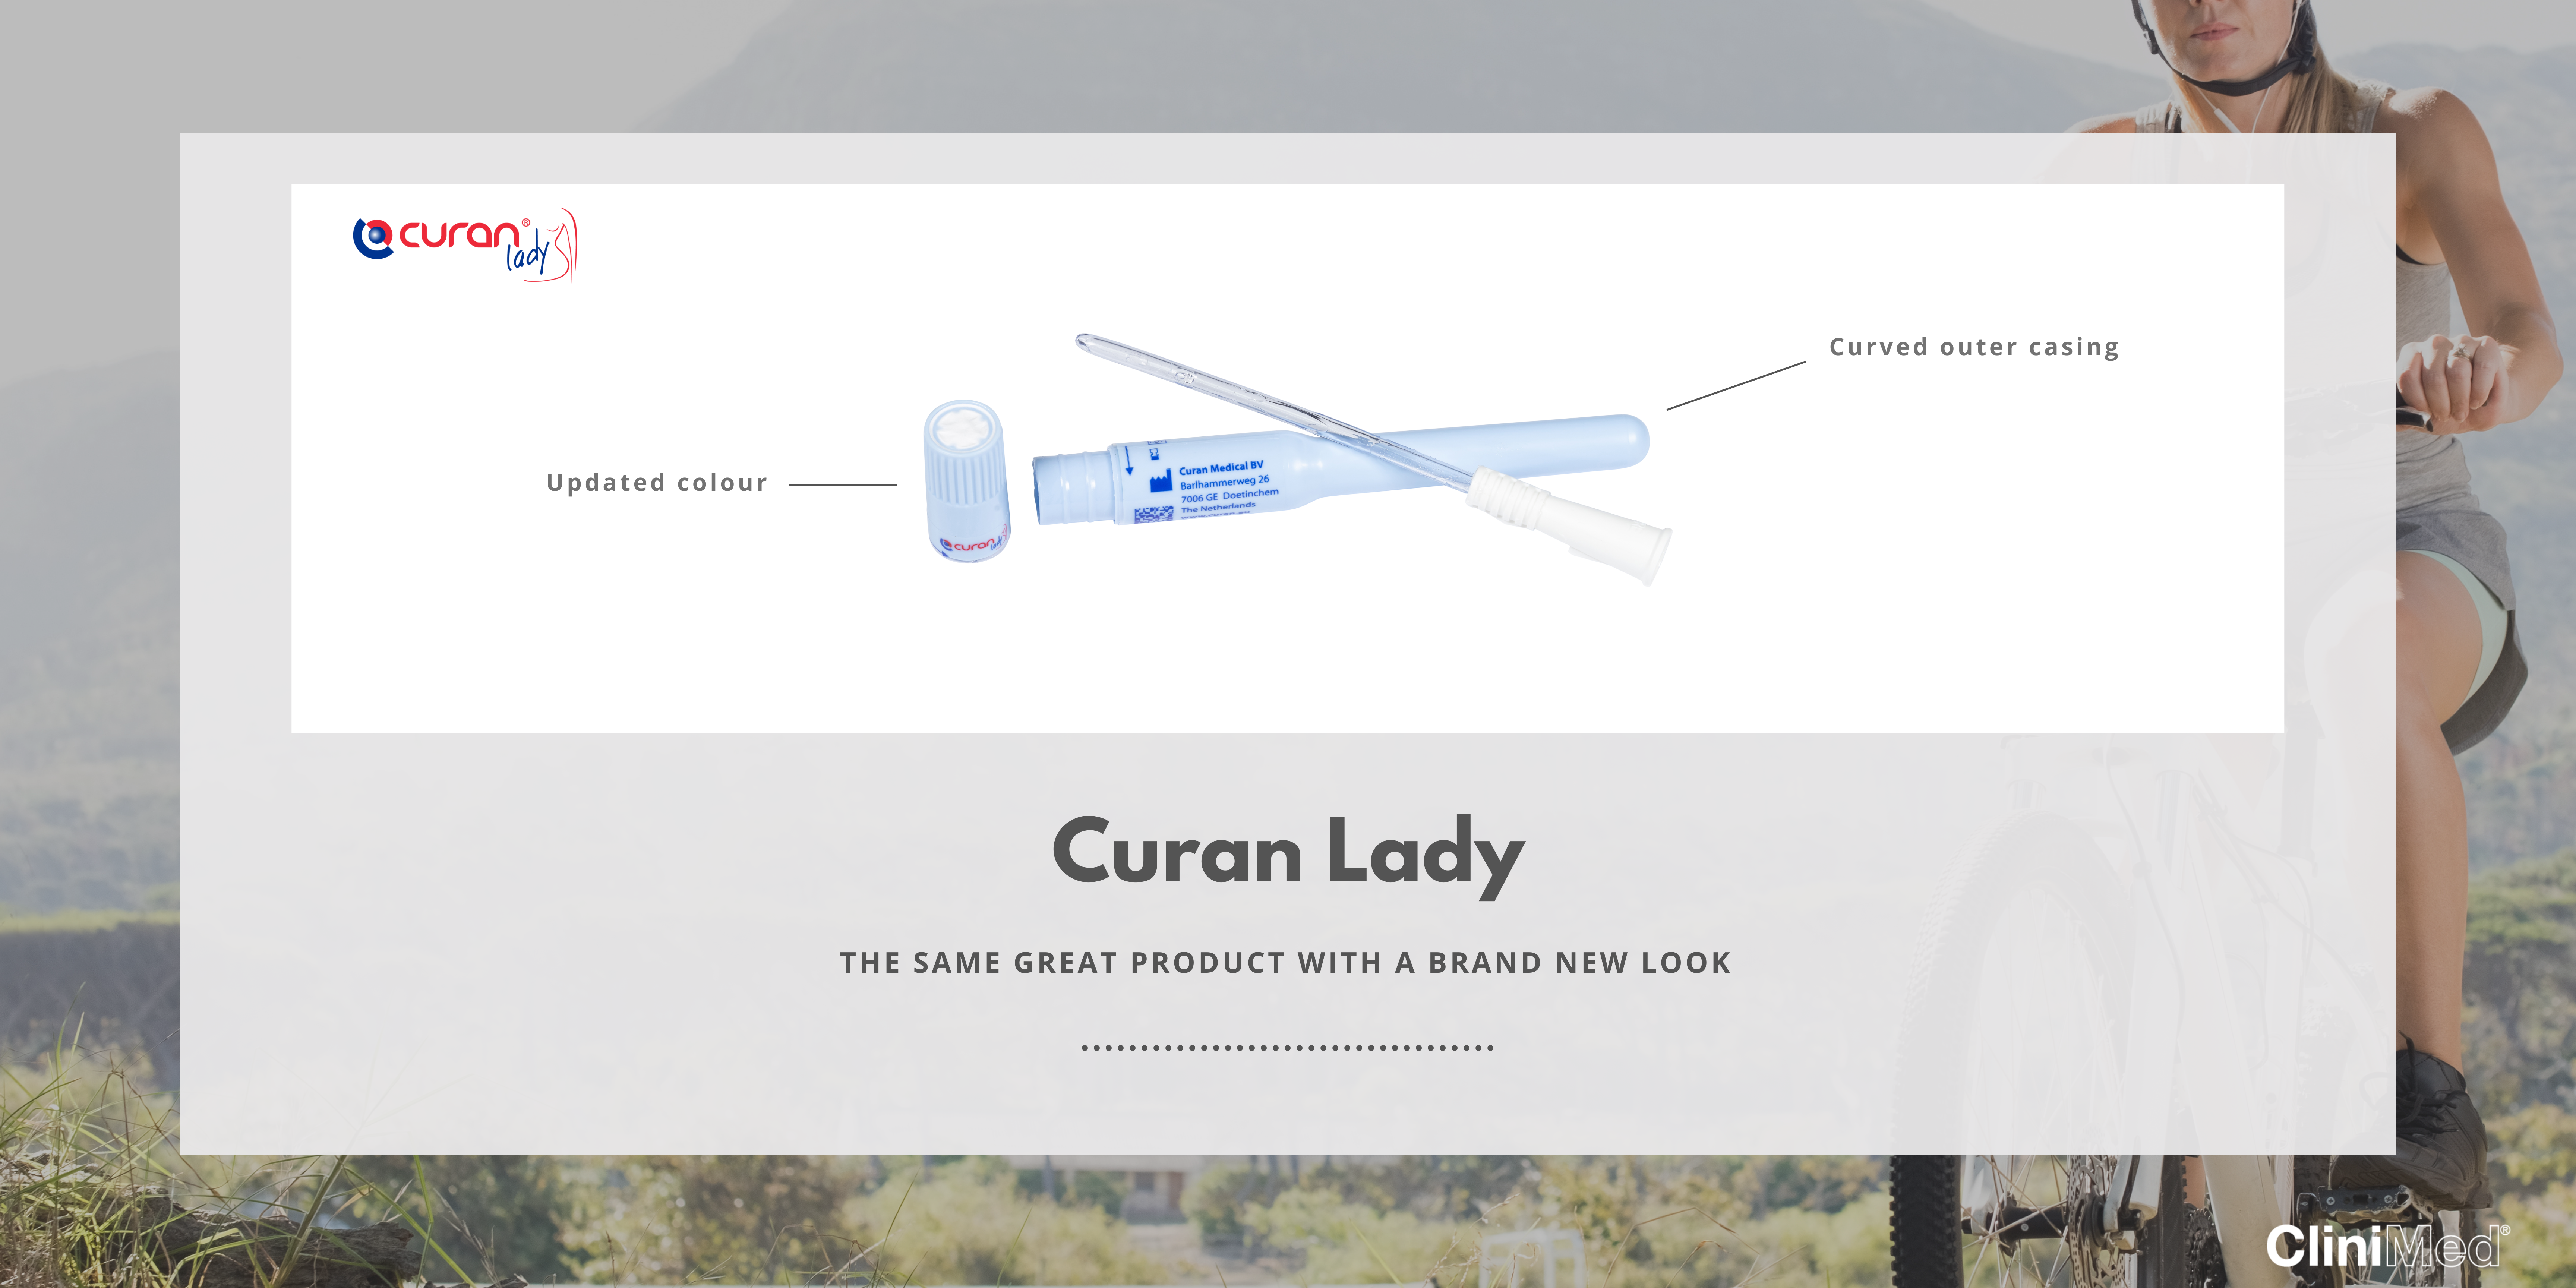 new_look_curan_lady_newspage_banner_3456x6912